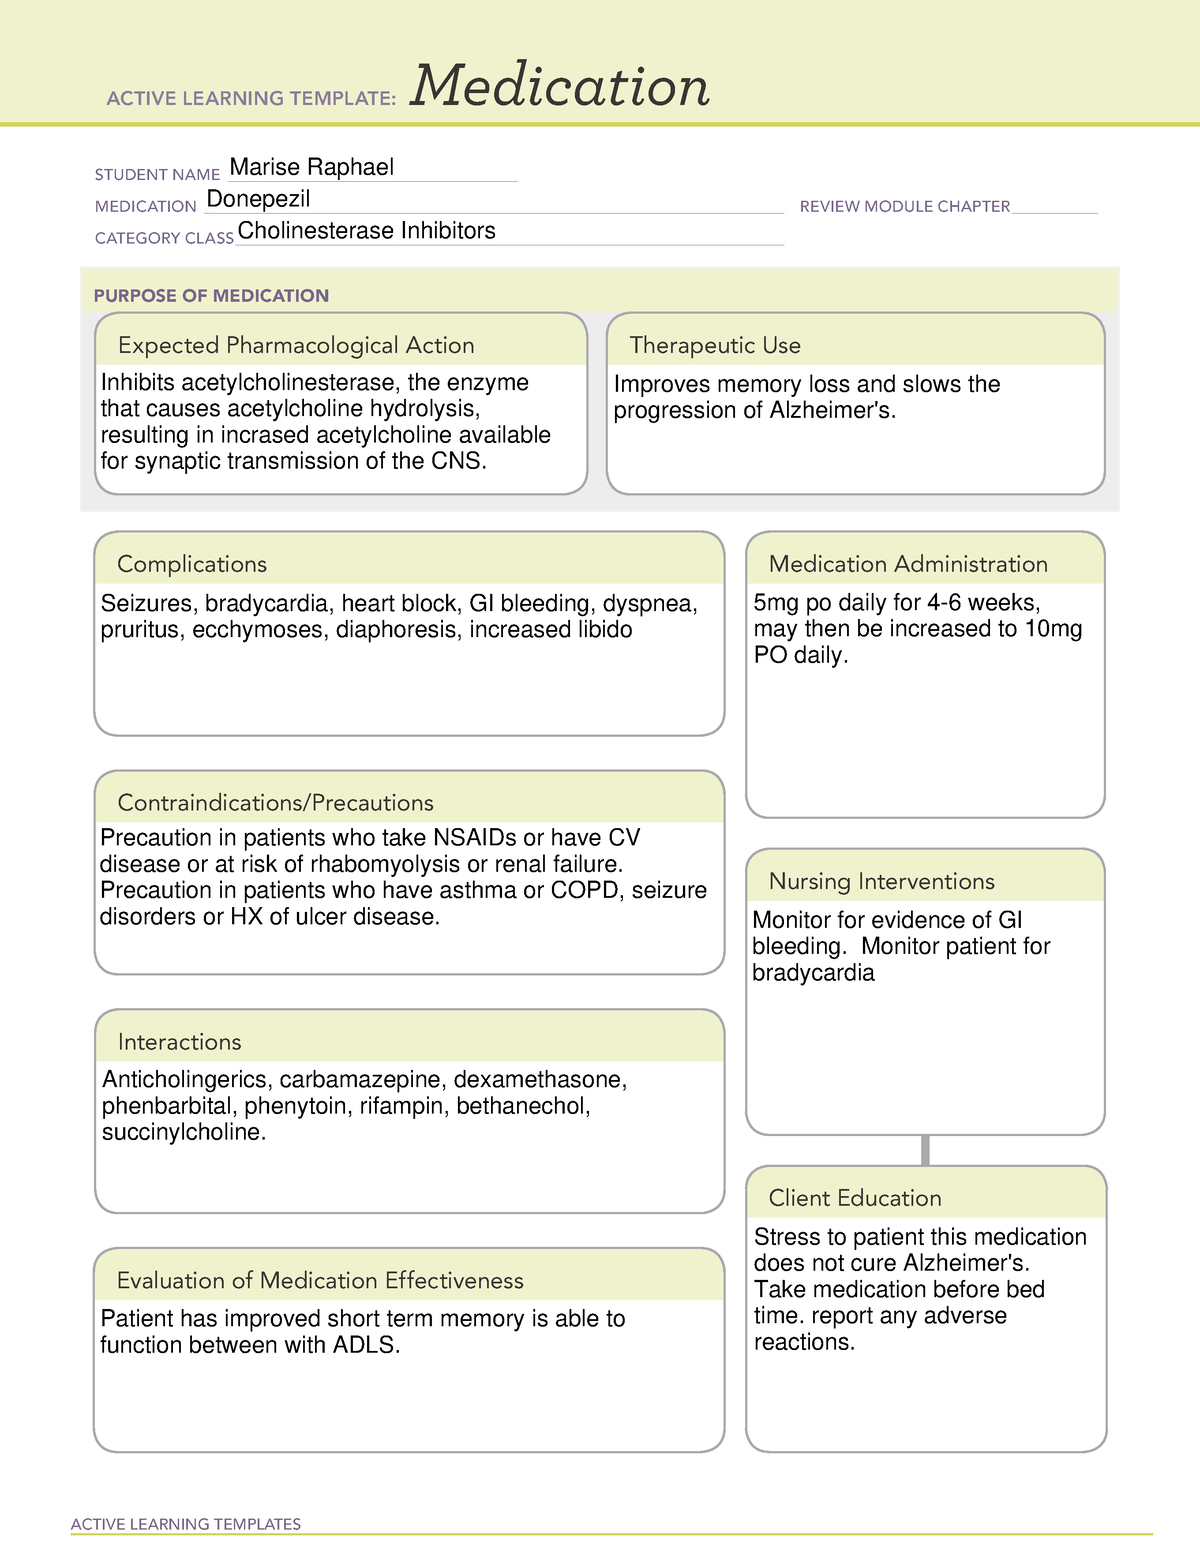 Donepezil drug profile learning template ACTIVE LEARNING TEMPLATES